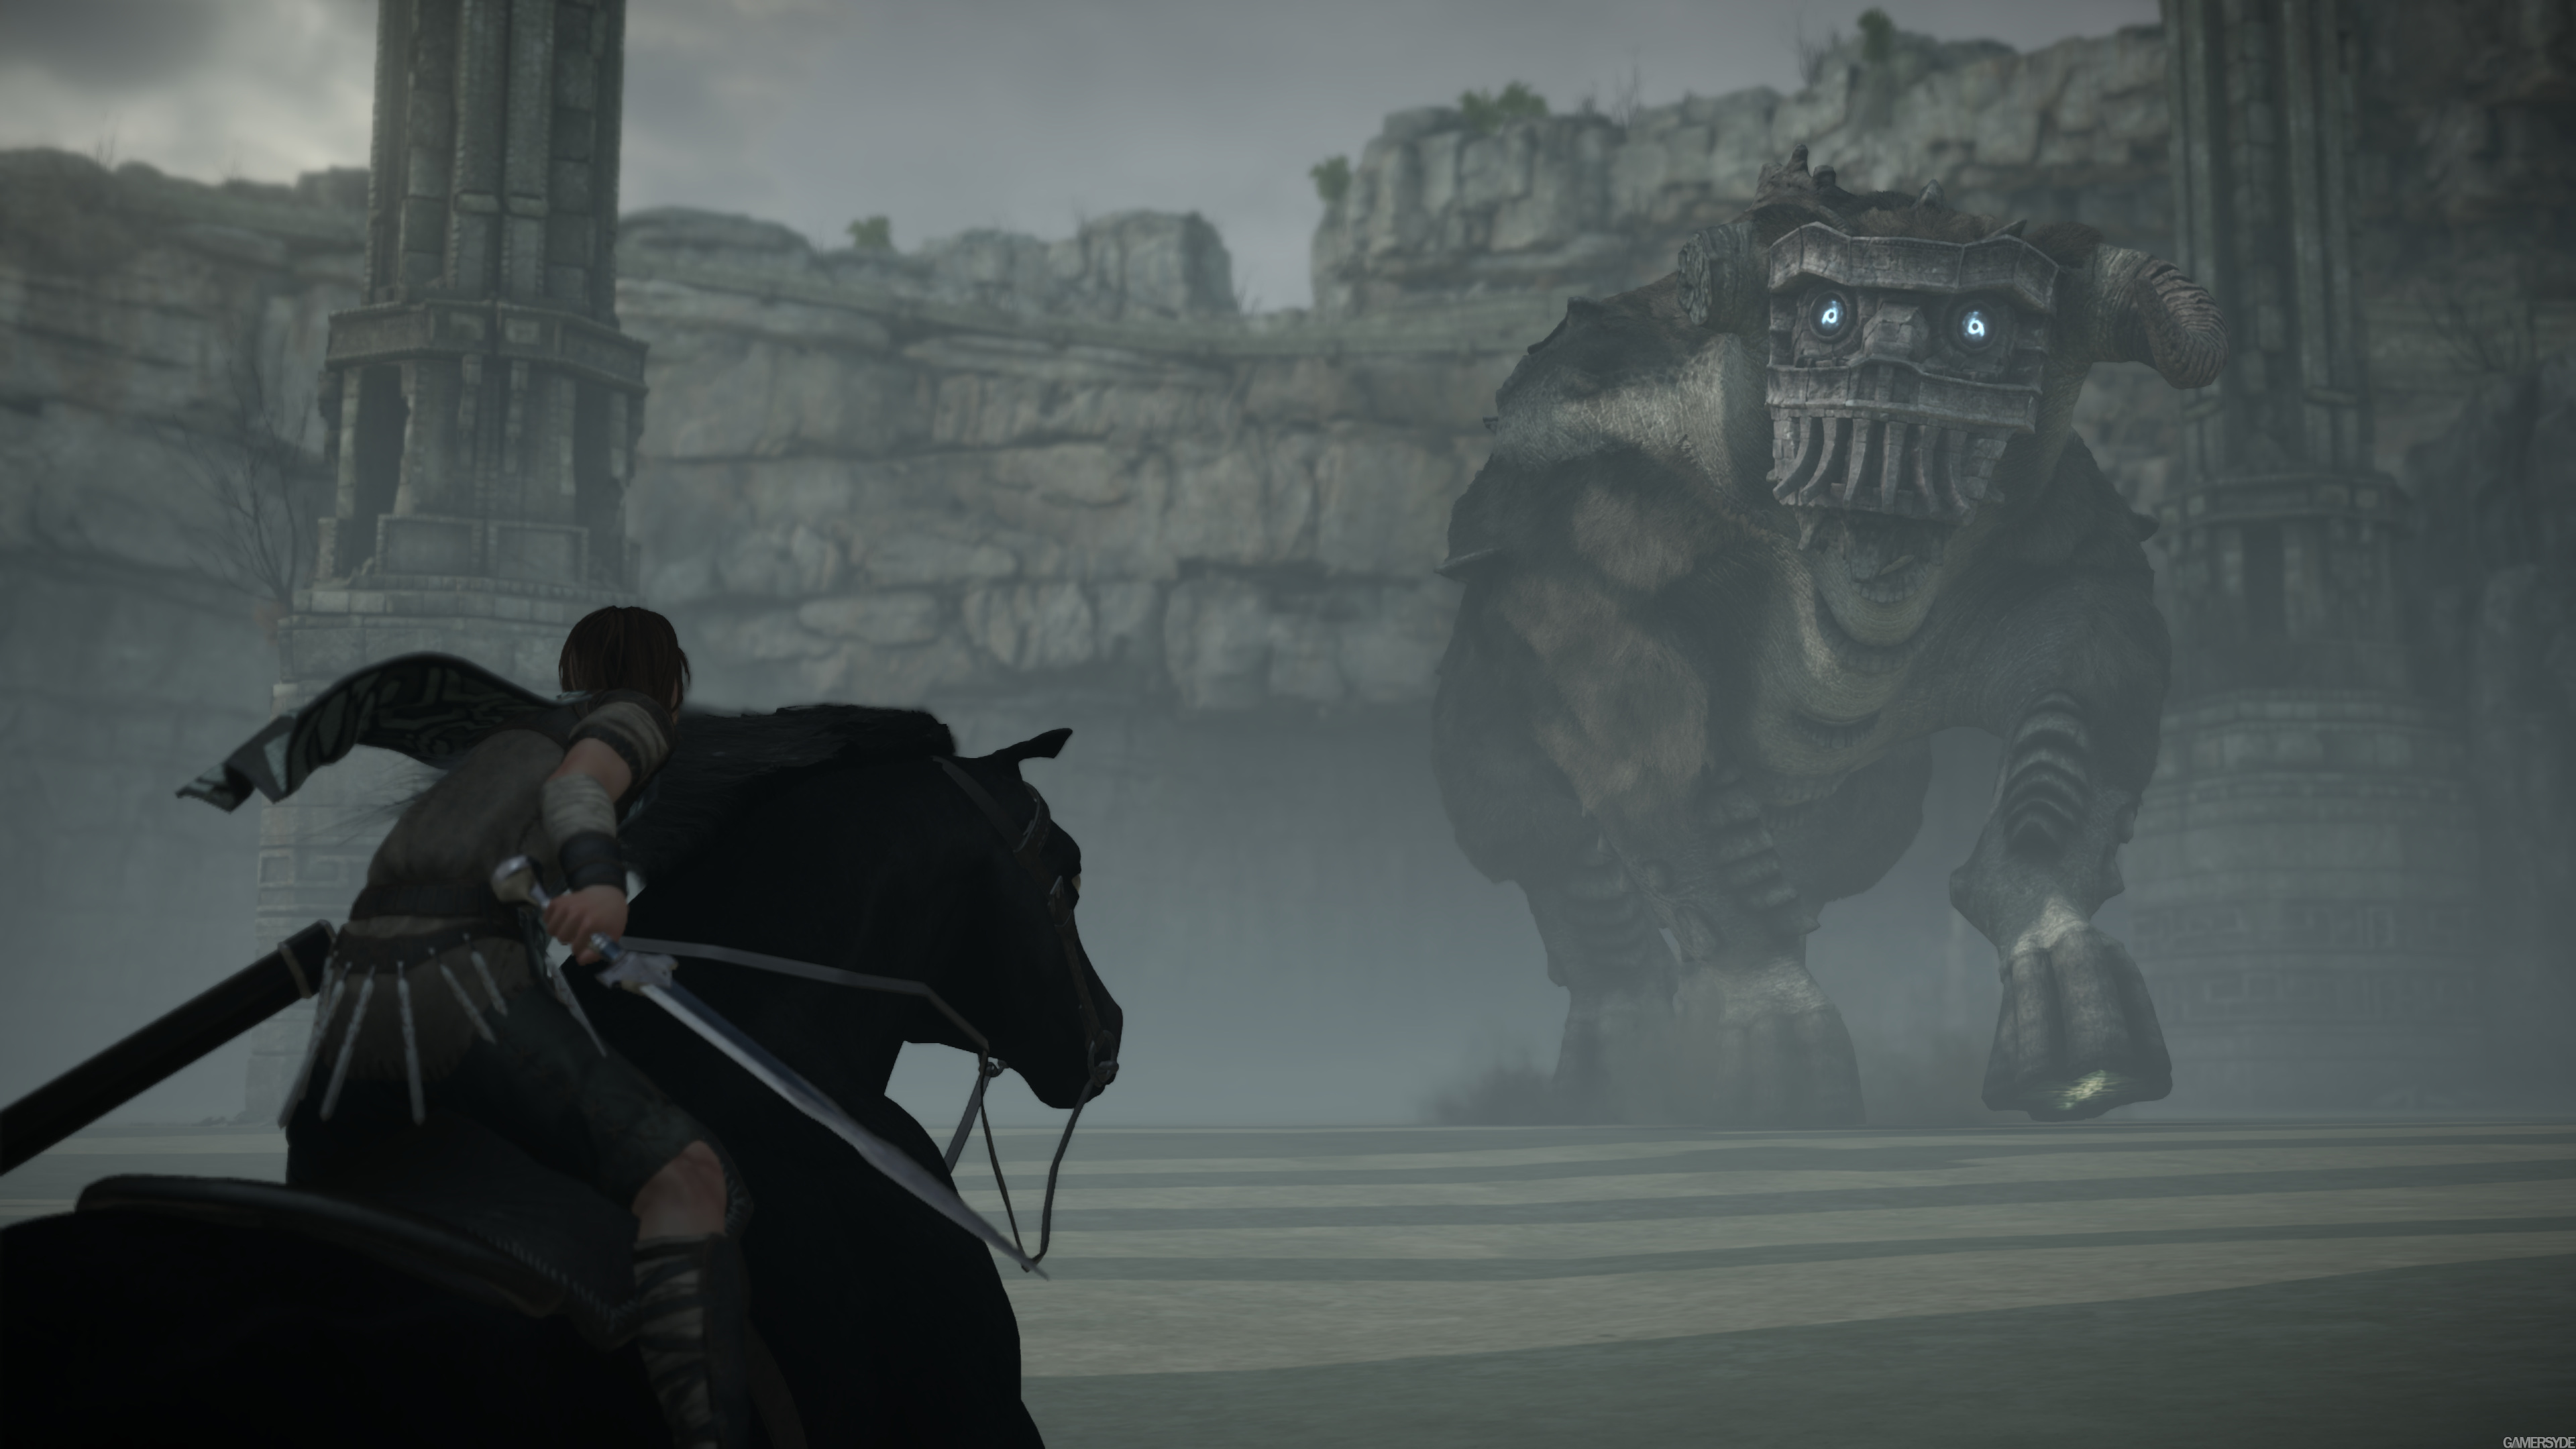 image_shadow_of_the_colossus-35814-910_0002.jpg